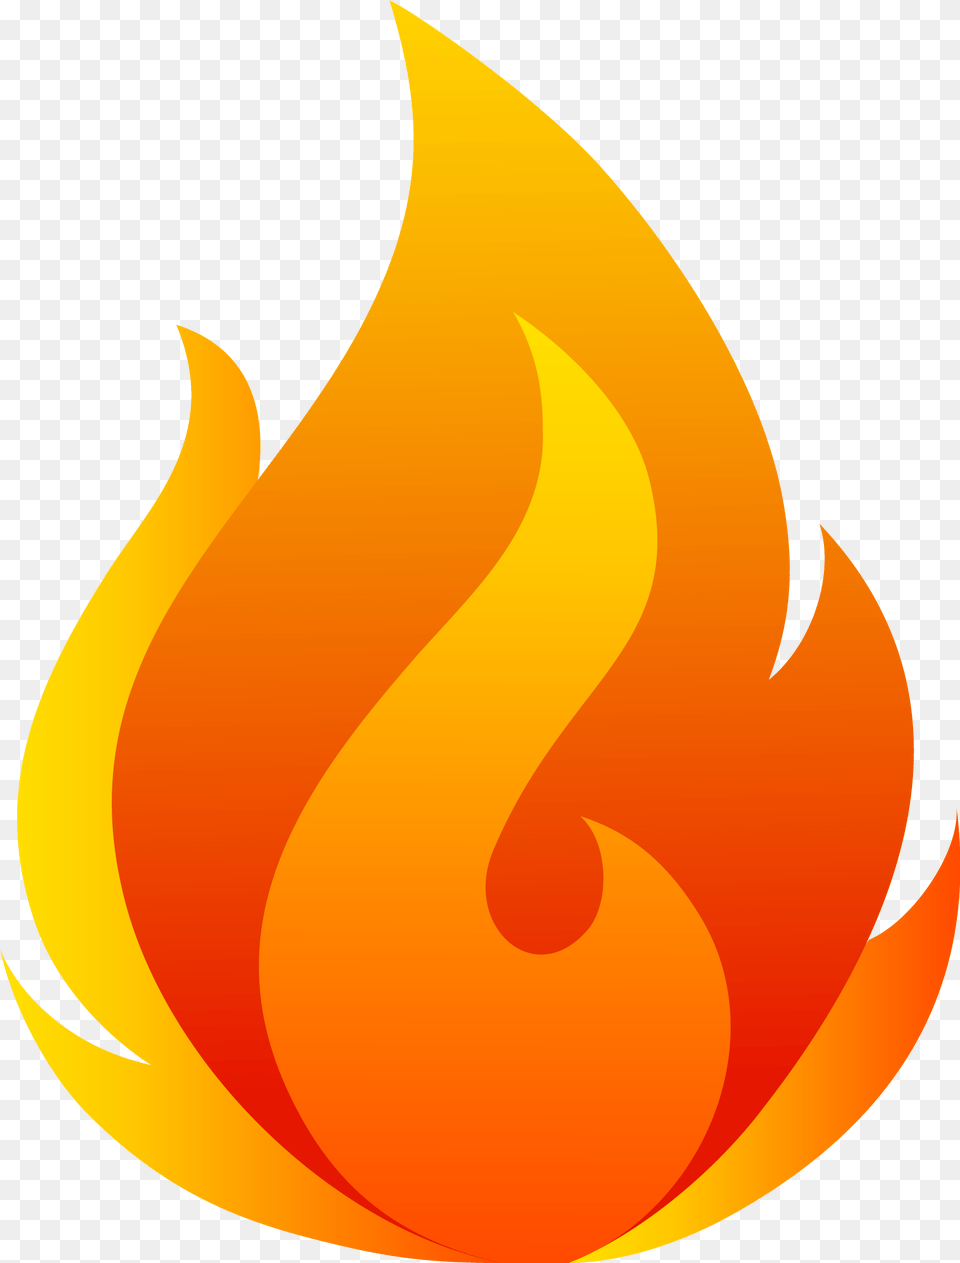 Flaming Fire Download Transparent Background Fire Icon Transparent, Flame, Astronomy, Moon, Nature Png Image